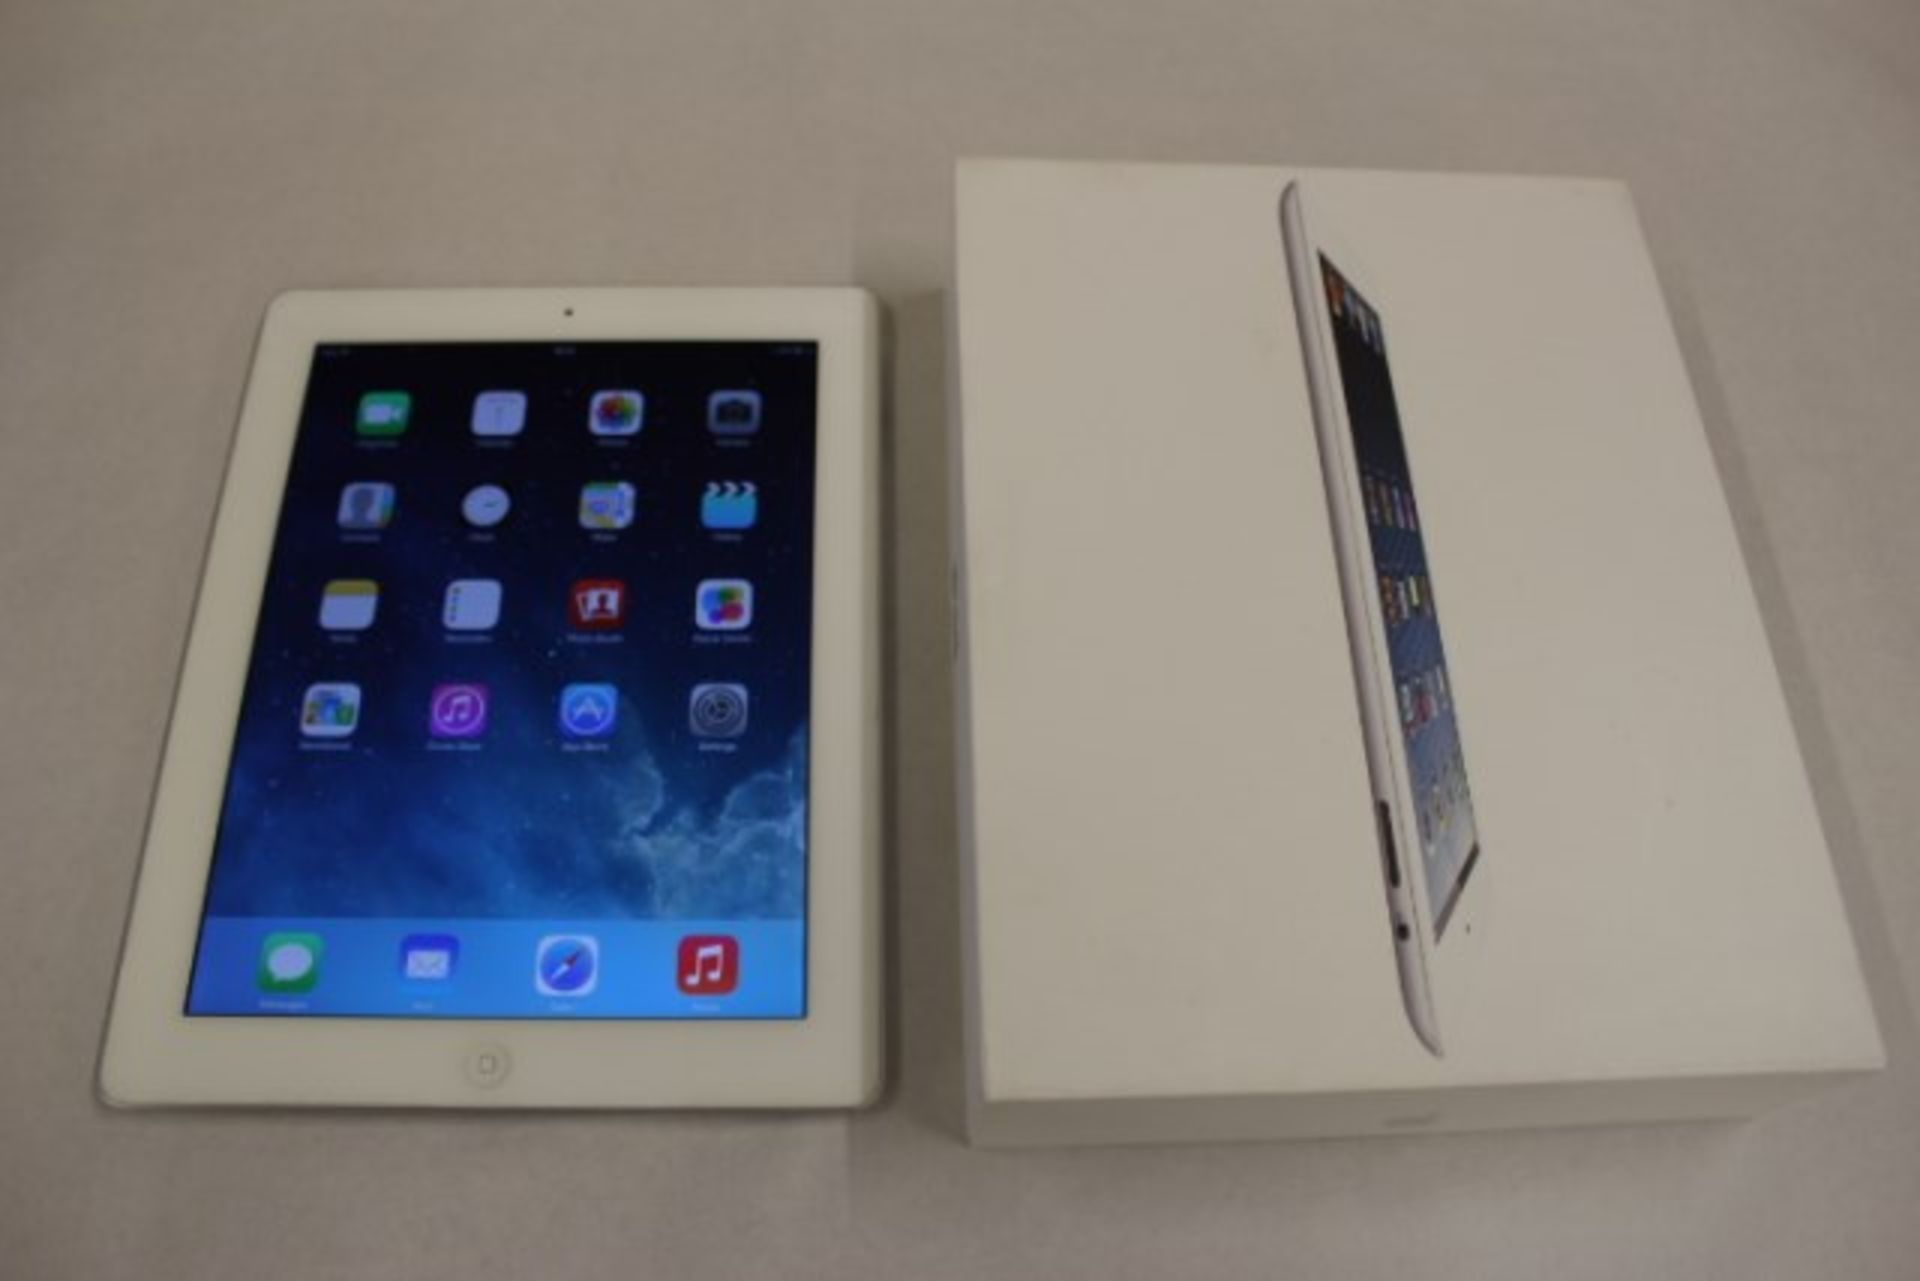 V Grade B iPad 4 16Gb Black With Two Cameras/Retina Display With Charger In Original Box - Factory - Image 2 of 2